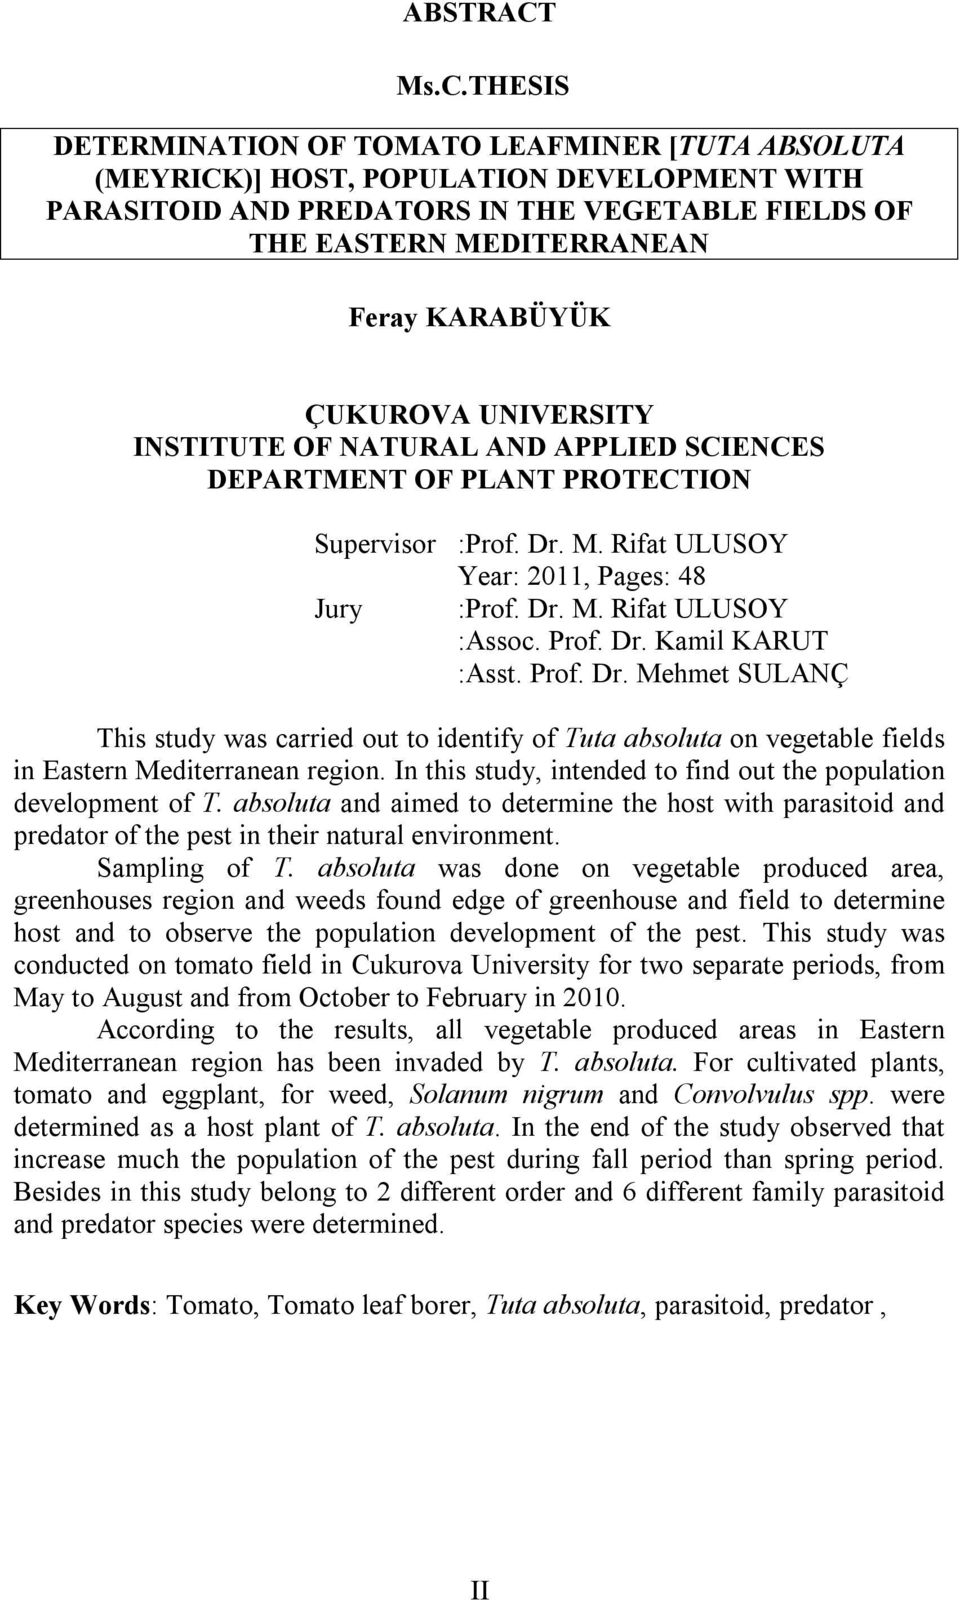 UNIVERSITY INSTITUTE OF NATURAL AND APPLIED SCIENCES DEPARTMENT OF PLANT PROTECTION Supervisor :Prof. Dr. M. Rifat ULUSOY Year: 2011, Pages: 48 Jury :Prof. Dr. M. Rifat ULUSOY :Assoc. Prof. Dr. Kamil KARUT :Asst.